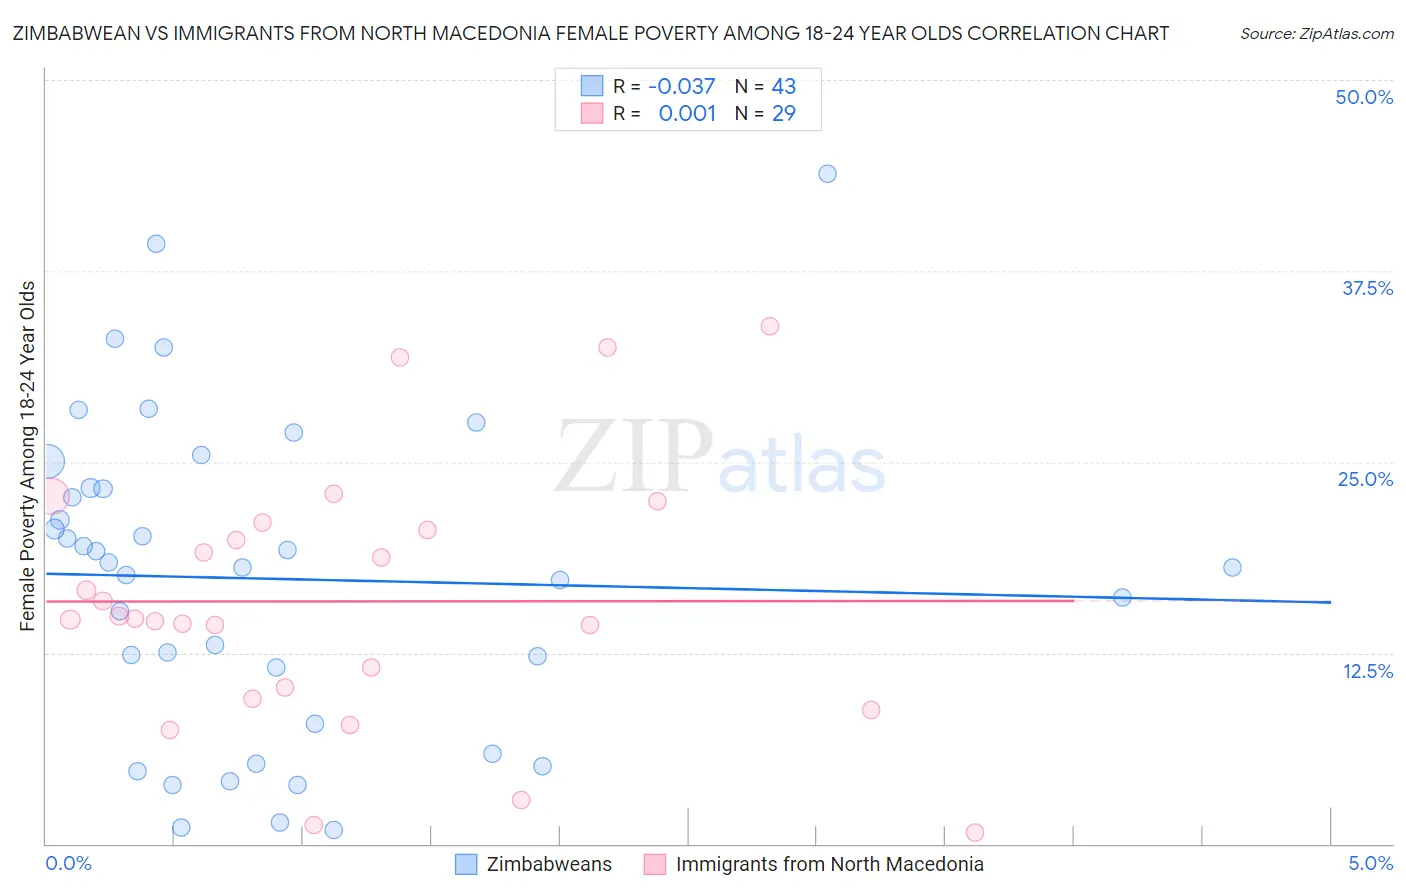 Zimbabwean vs Immigrants from North Macedonia Female Poverty Among 18-24 Year Olds